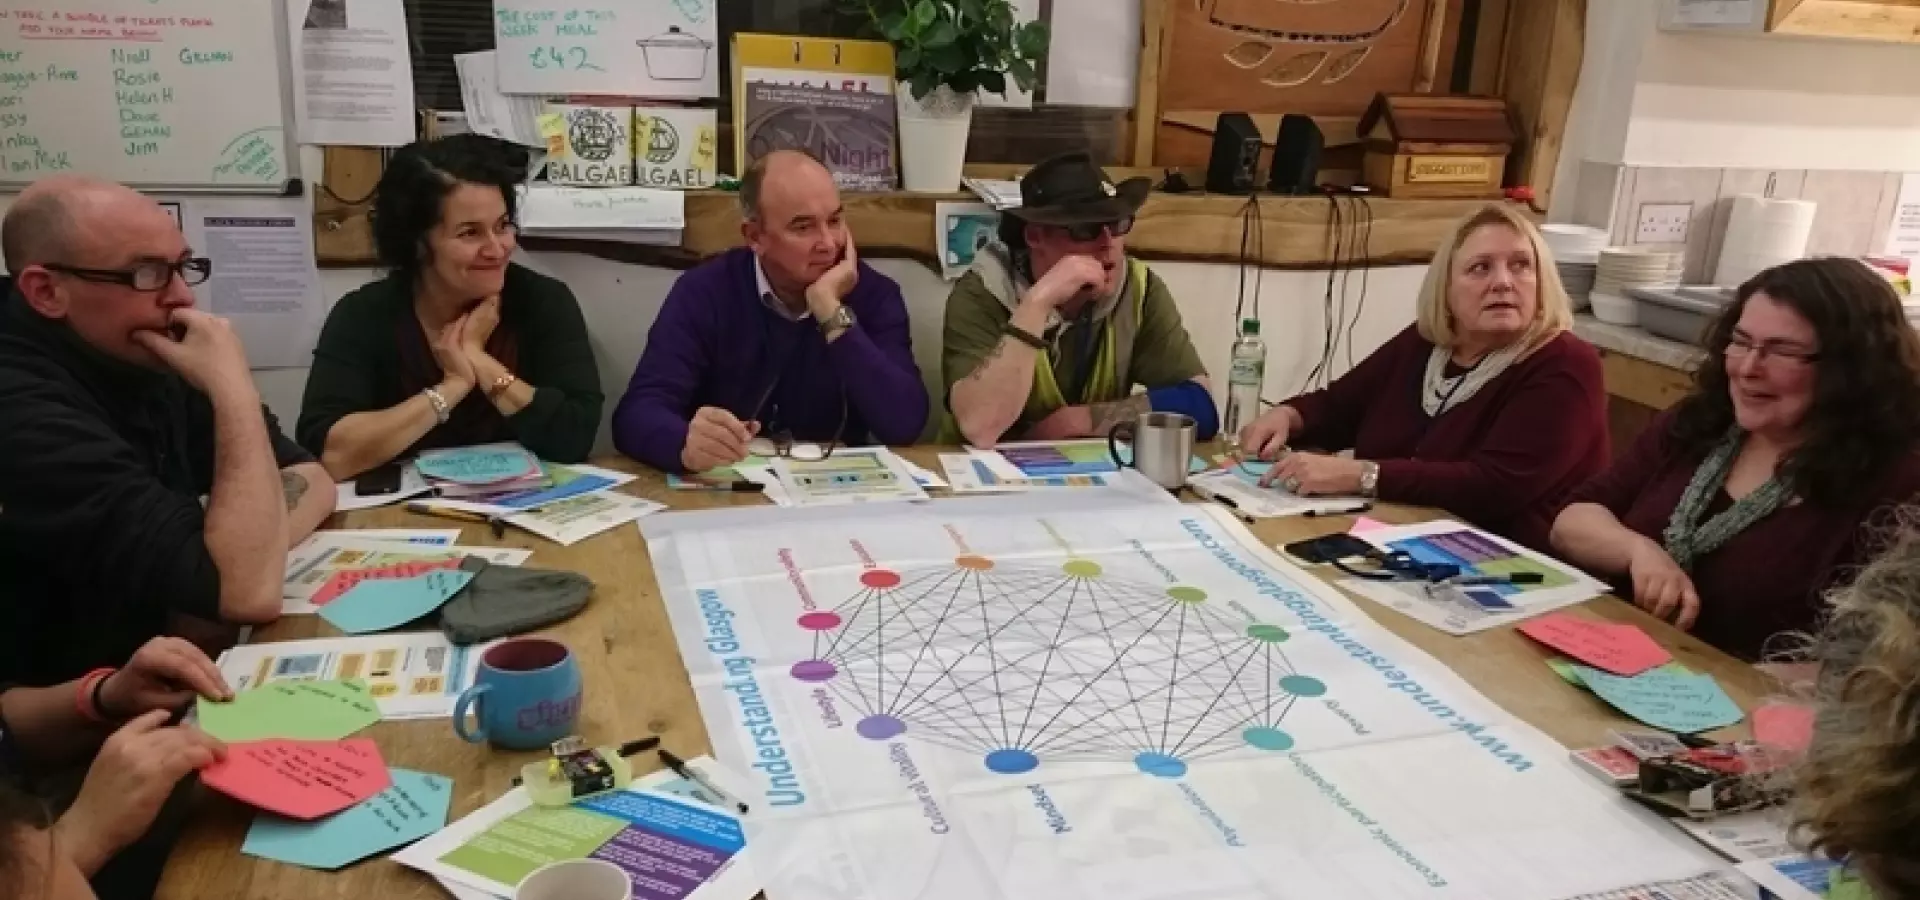 Group of people sitting around a table and playing the Glasgow Game, with colourful post-its and the Glasgow Game banner in the middle.